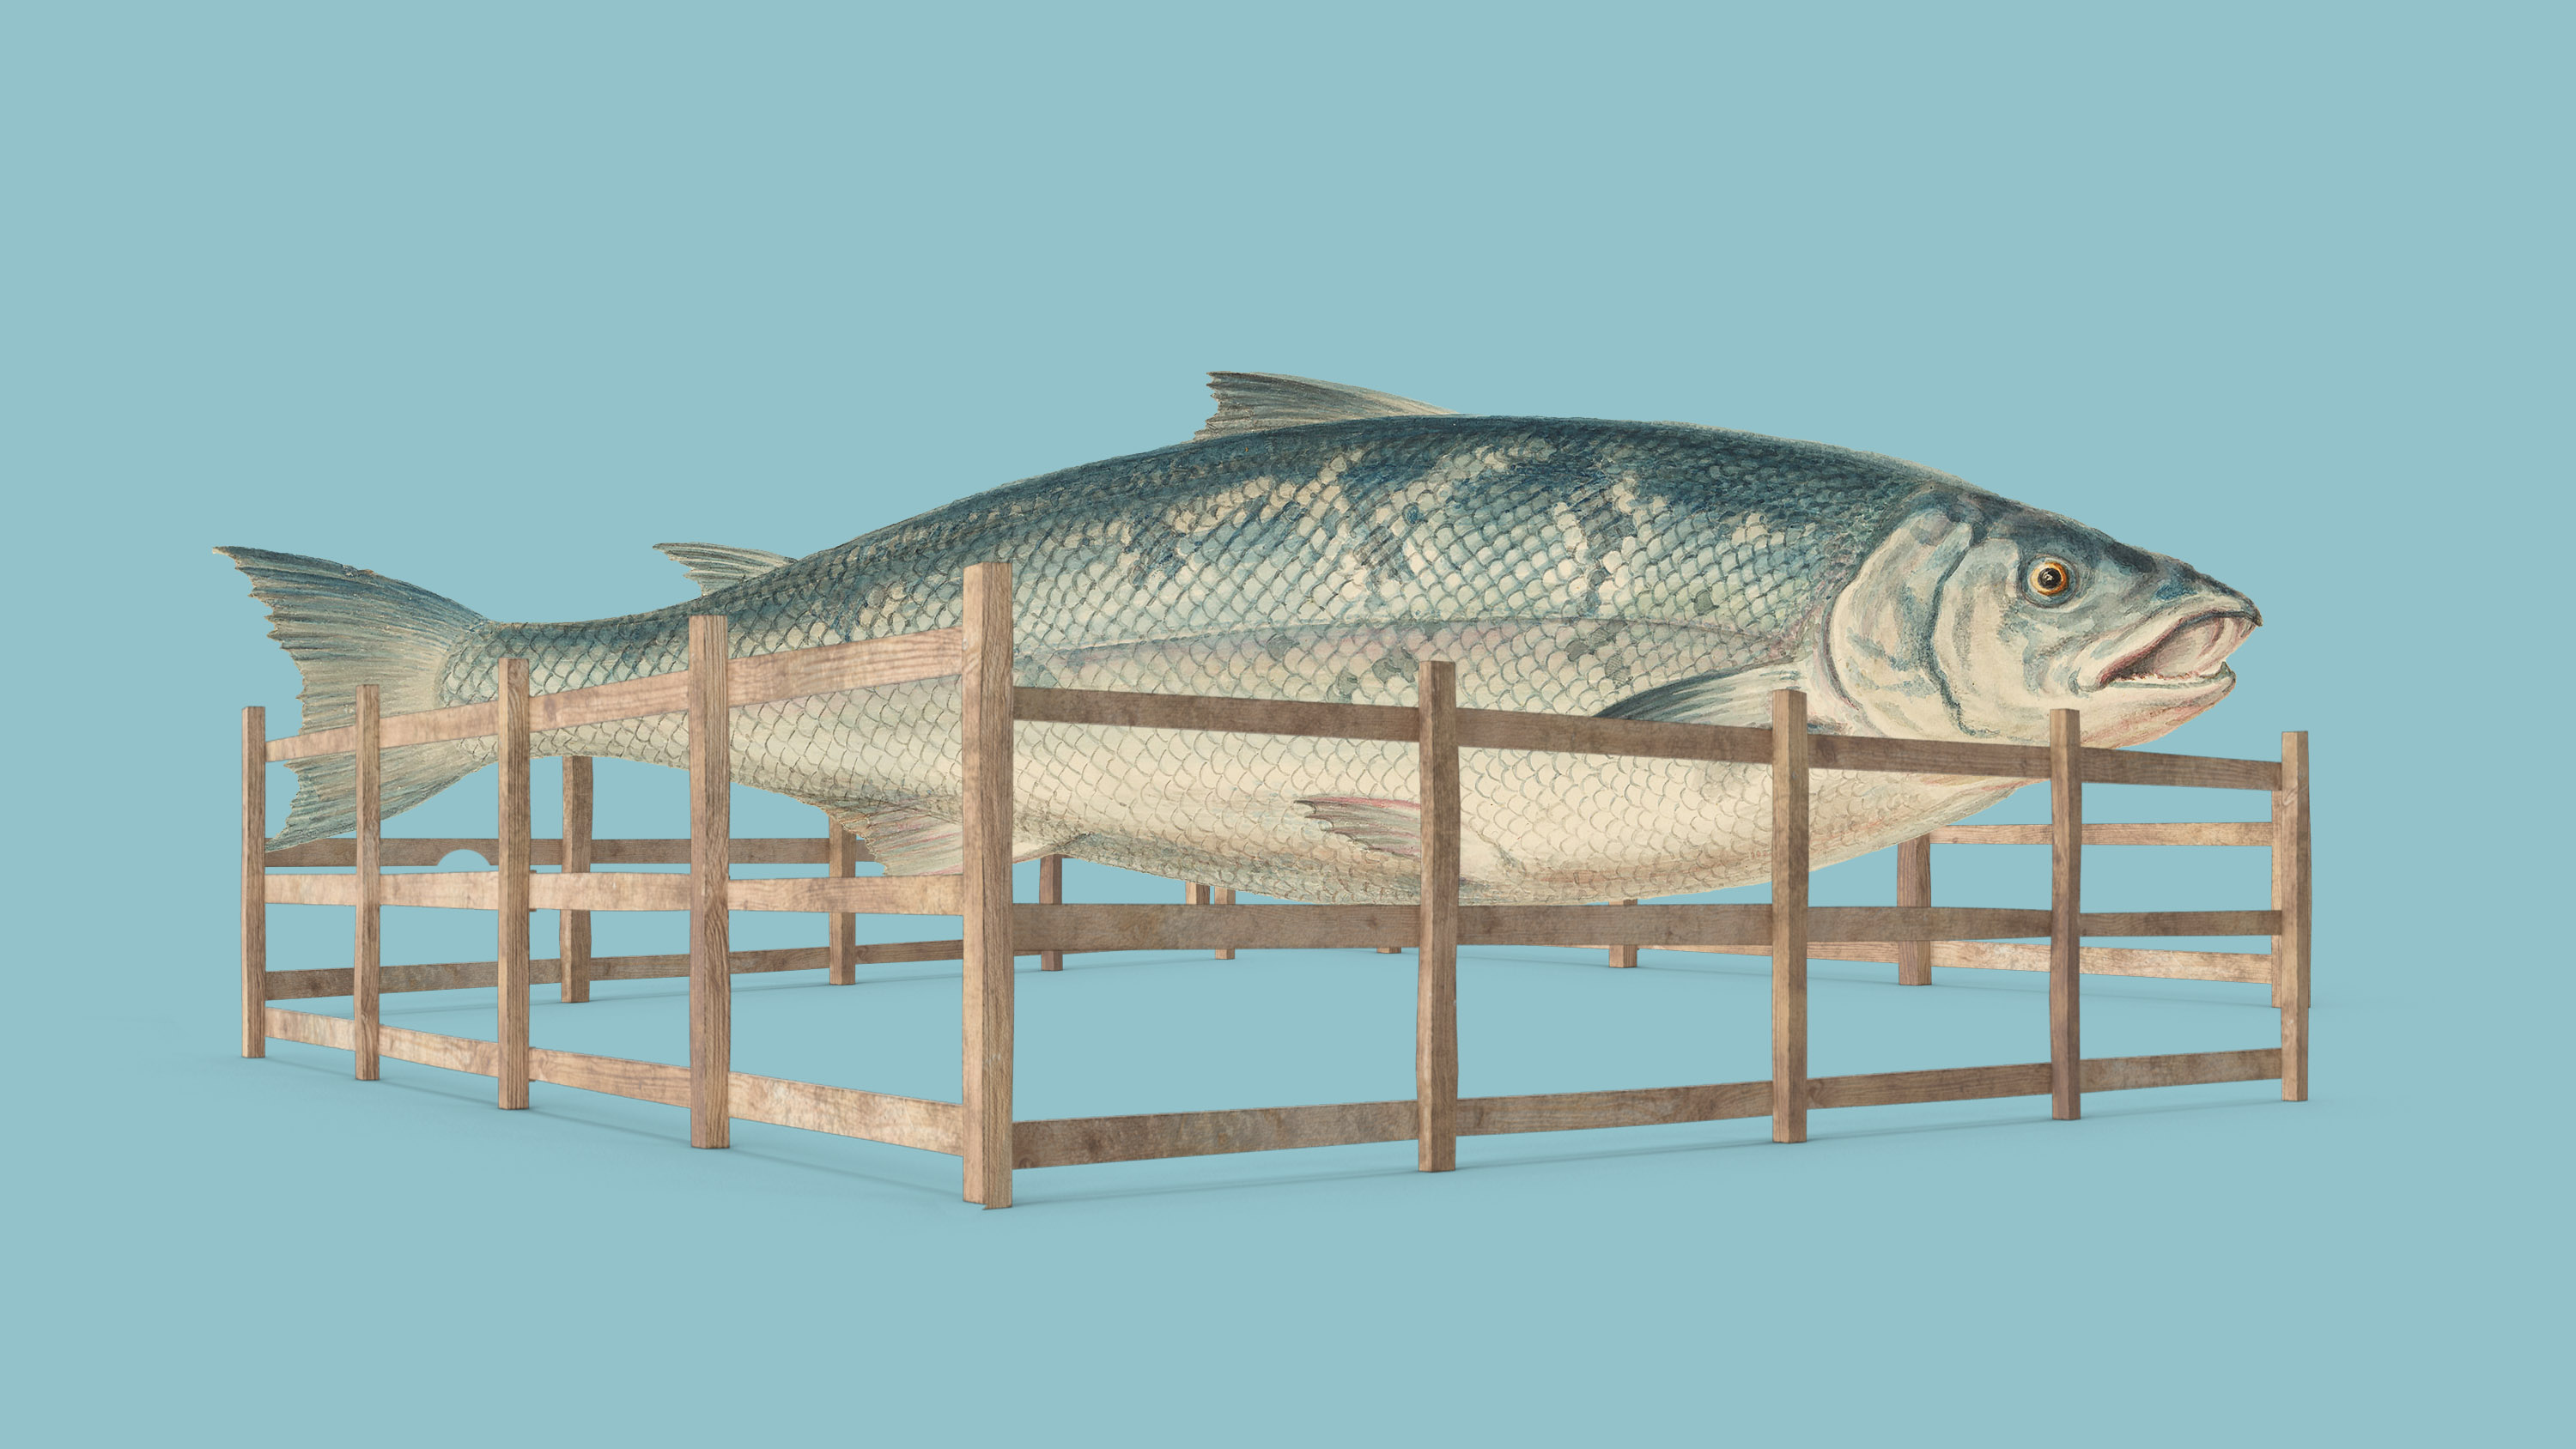 illustration of a large salmon in a small farm pen